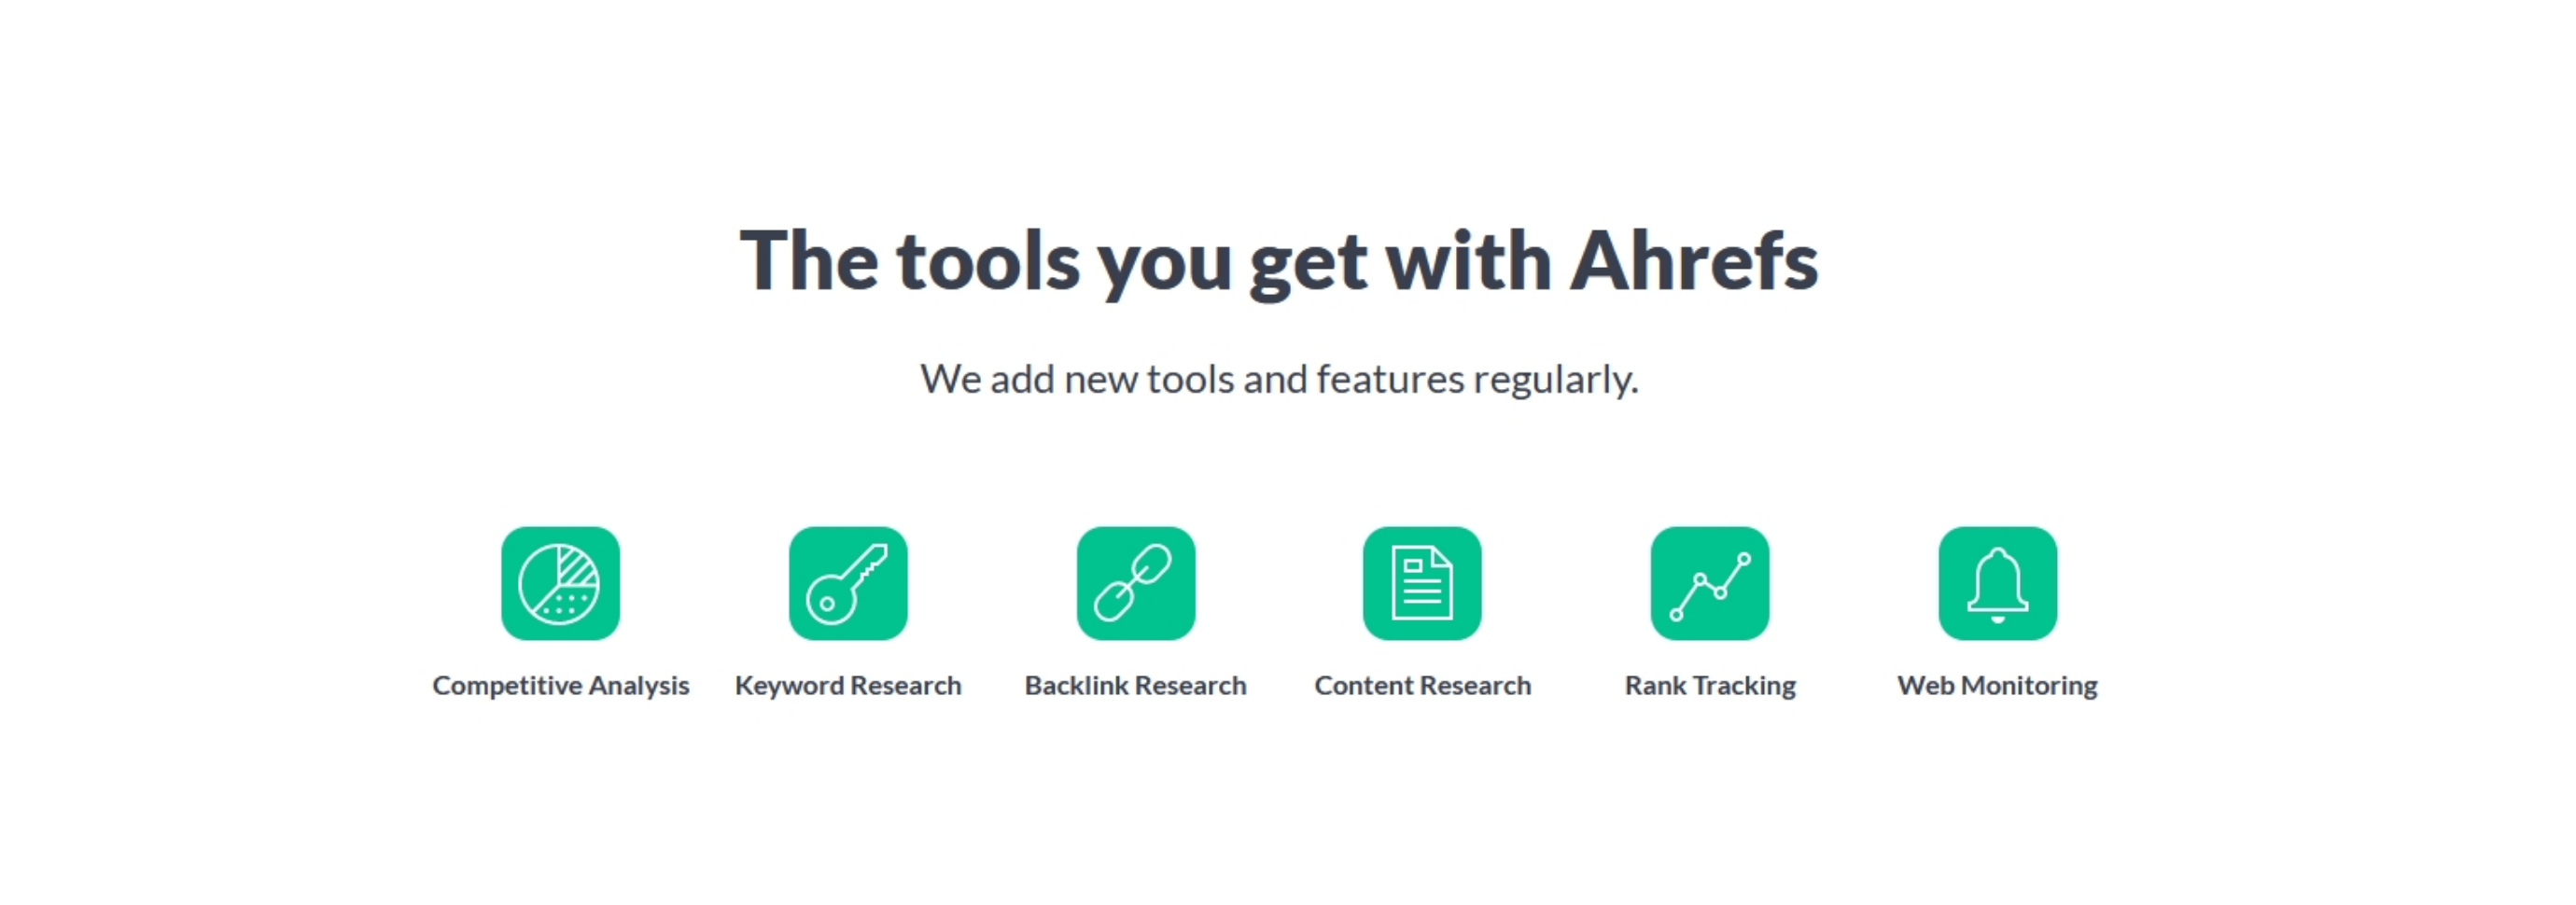 The tools you get with Ahrefs